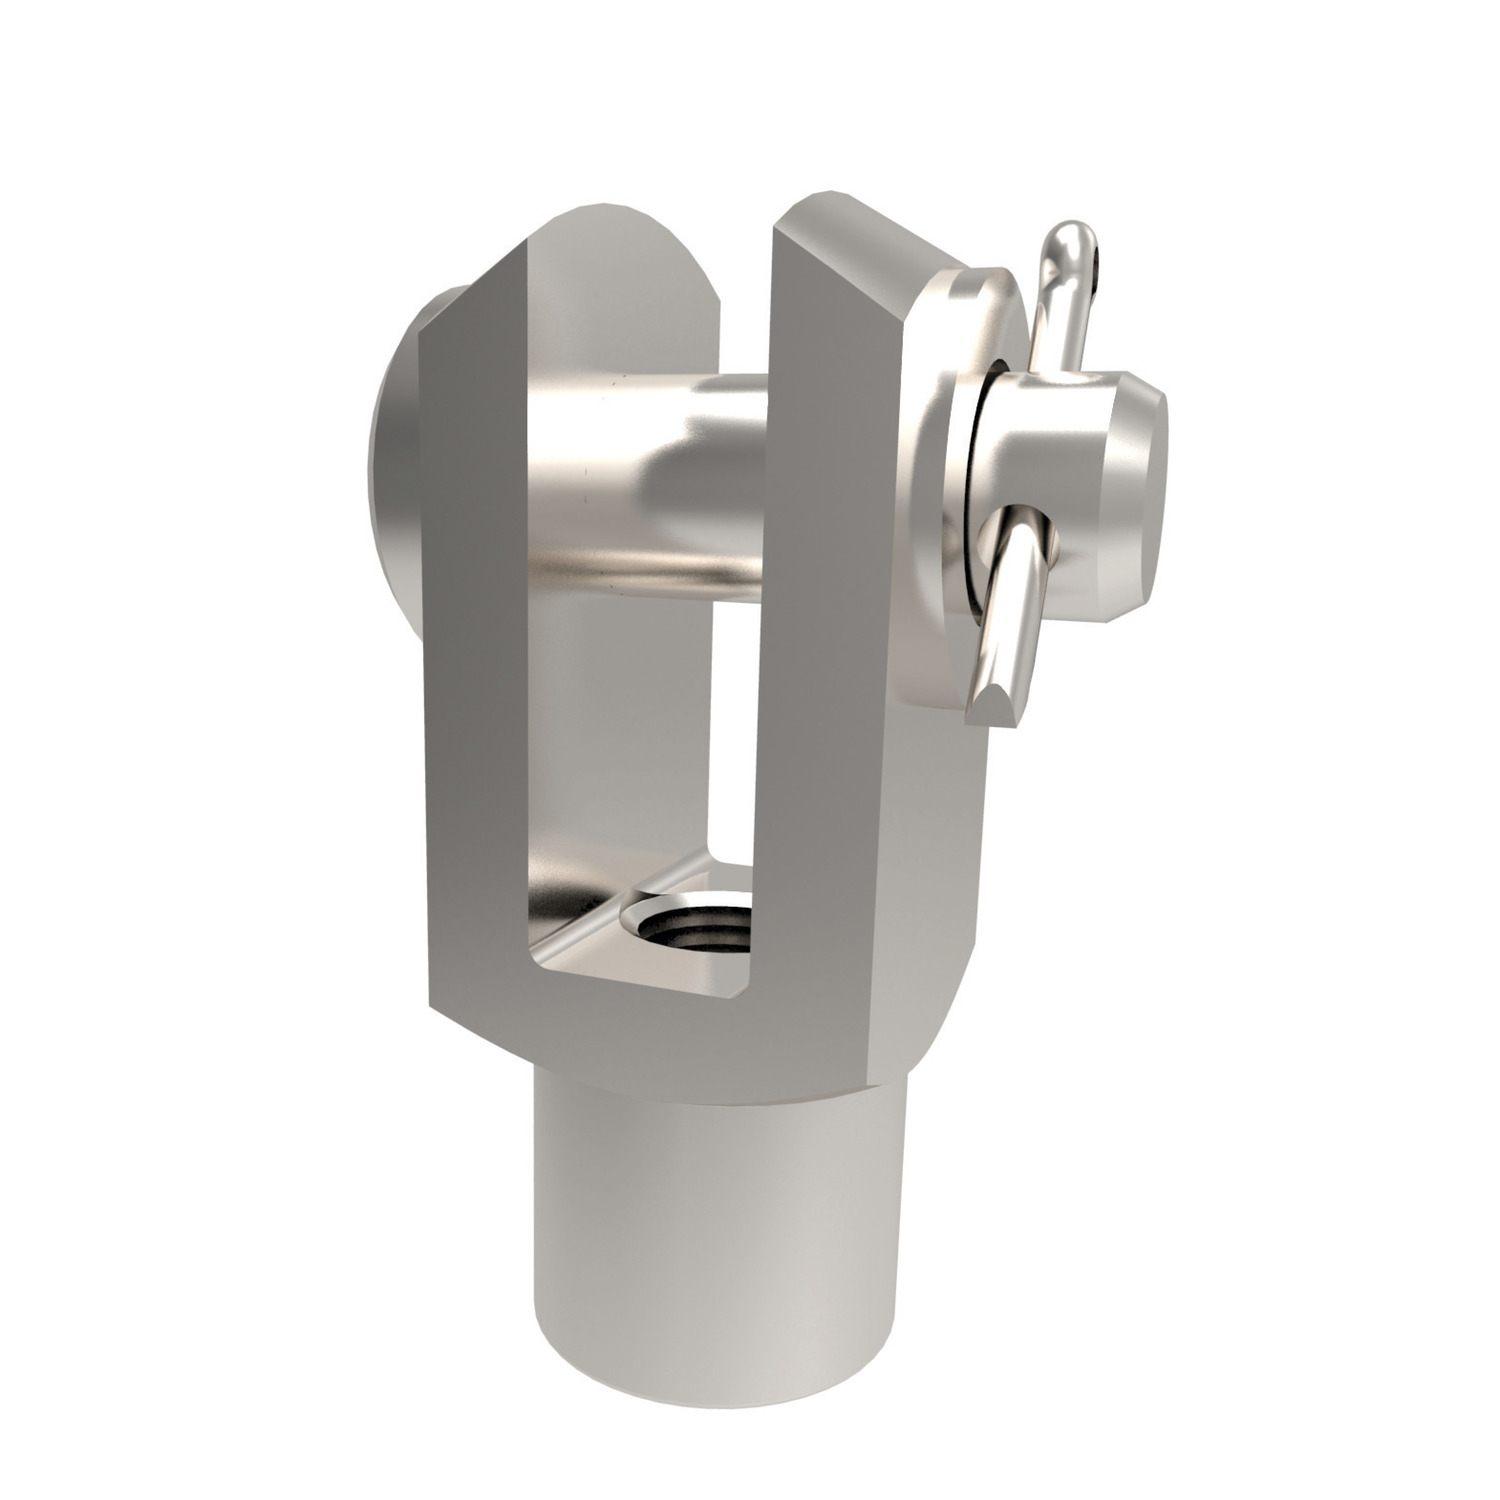 Stainless Clevis Joint with Pin Stainless steel clevis joint with pin. From sizes M5 to M24. Standard thread is right hand.